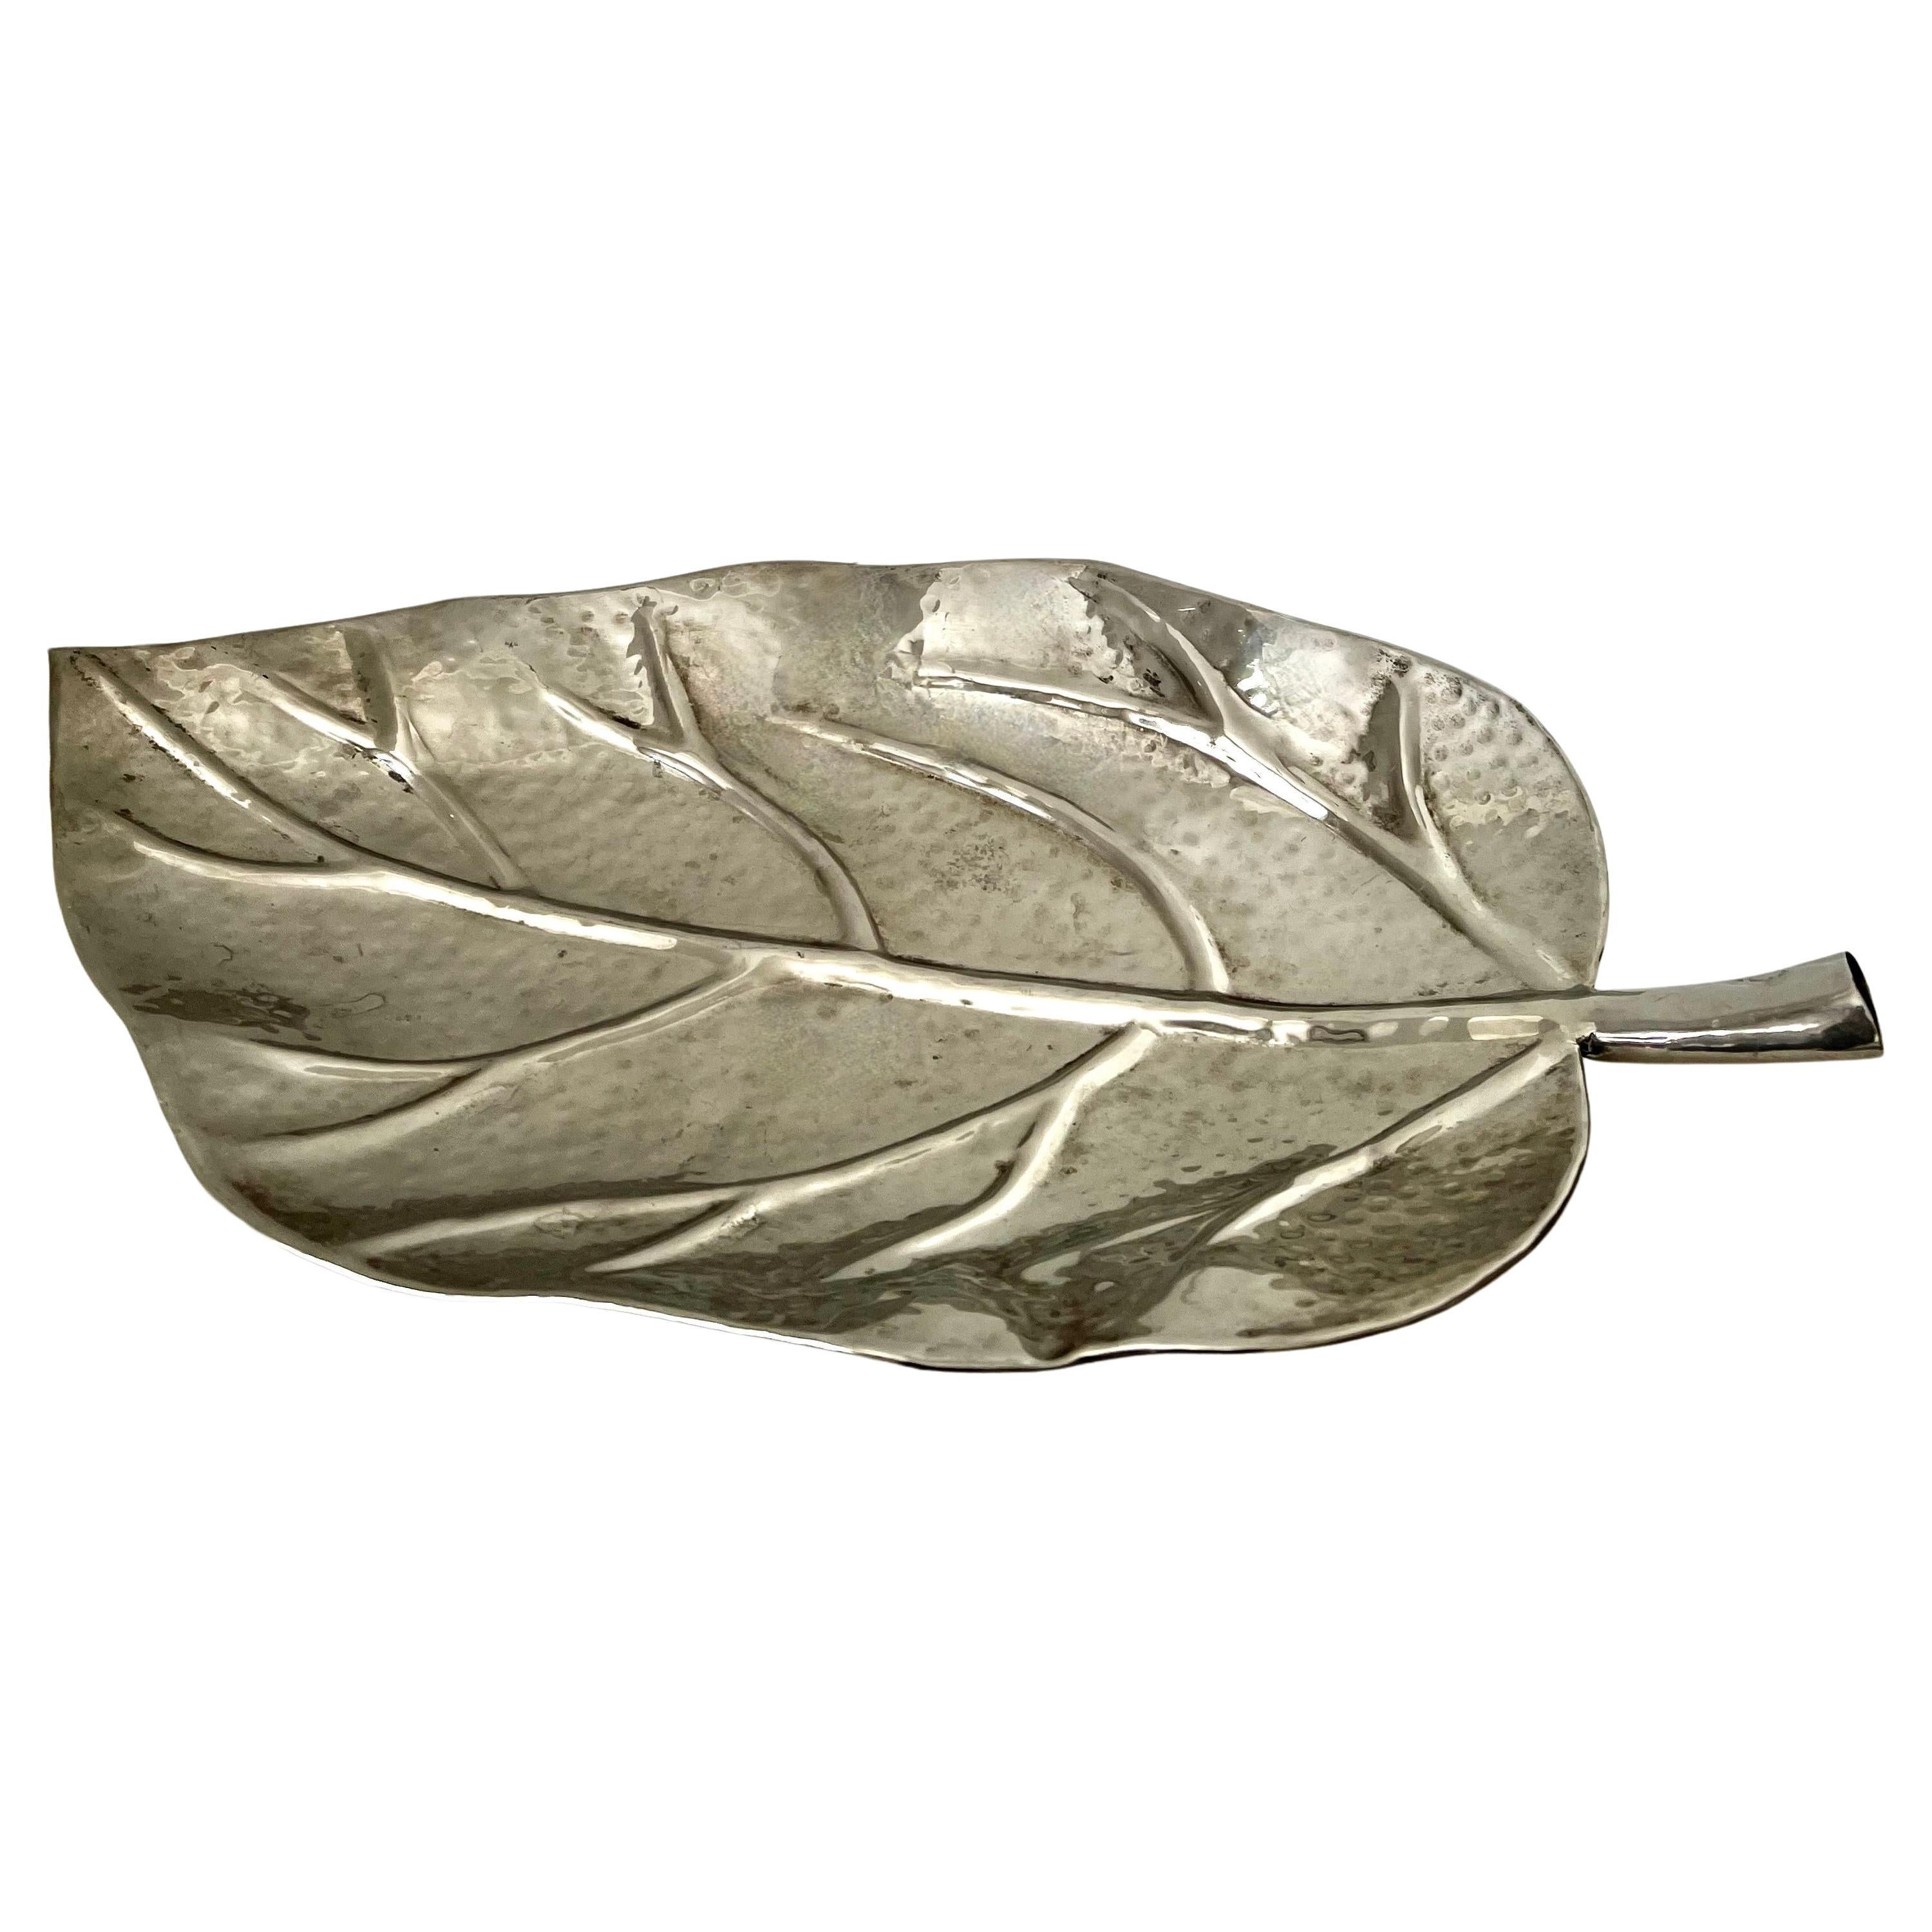 a Wonderful Large Leaf shaped serving tray or decorative piece.  The silver is hammered and when polished is stunning, but also looks great with a bit of patina.

A compliment to any cocktail table, as a decorative piece in any room or kitchen. 